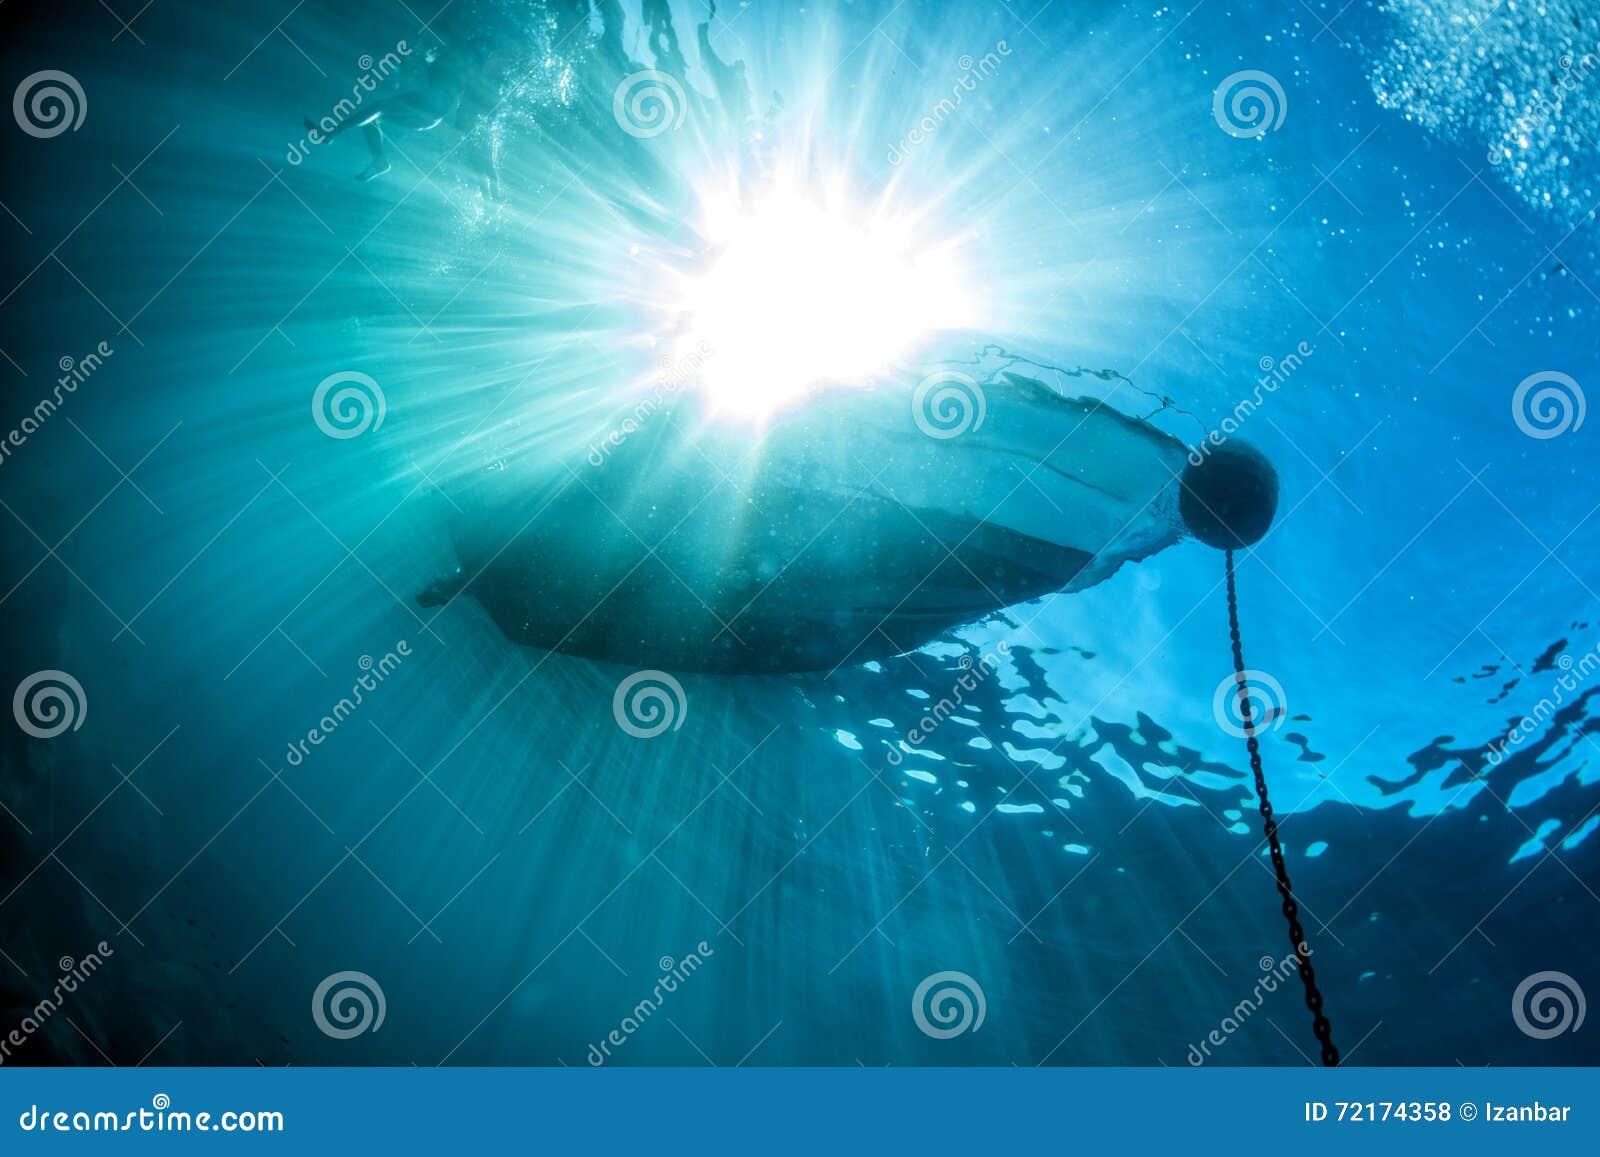 Boat Ship from Underwater Blue Ocean with Sun Rays Stock Photo